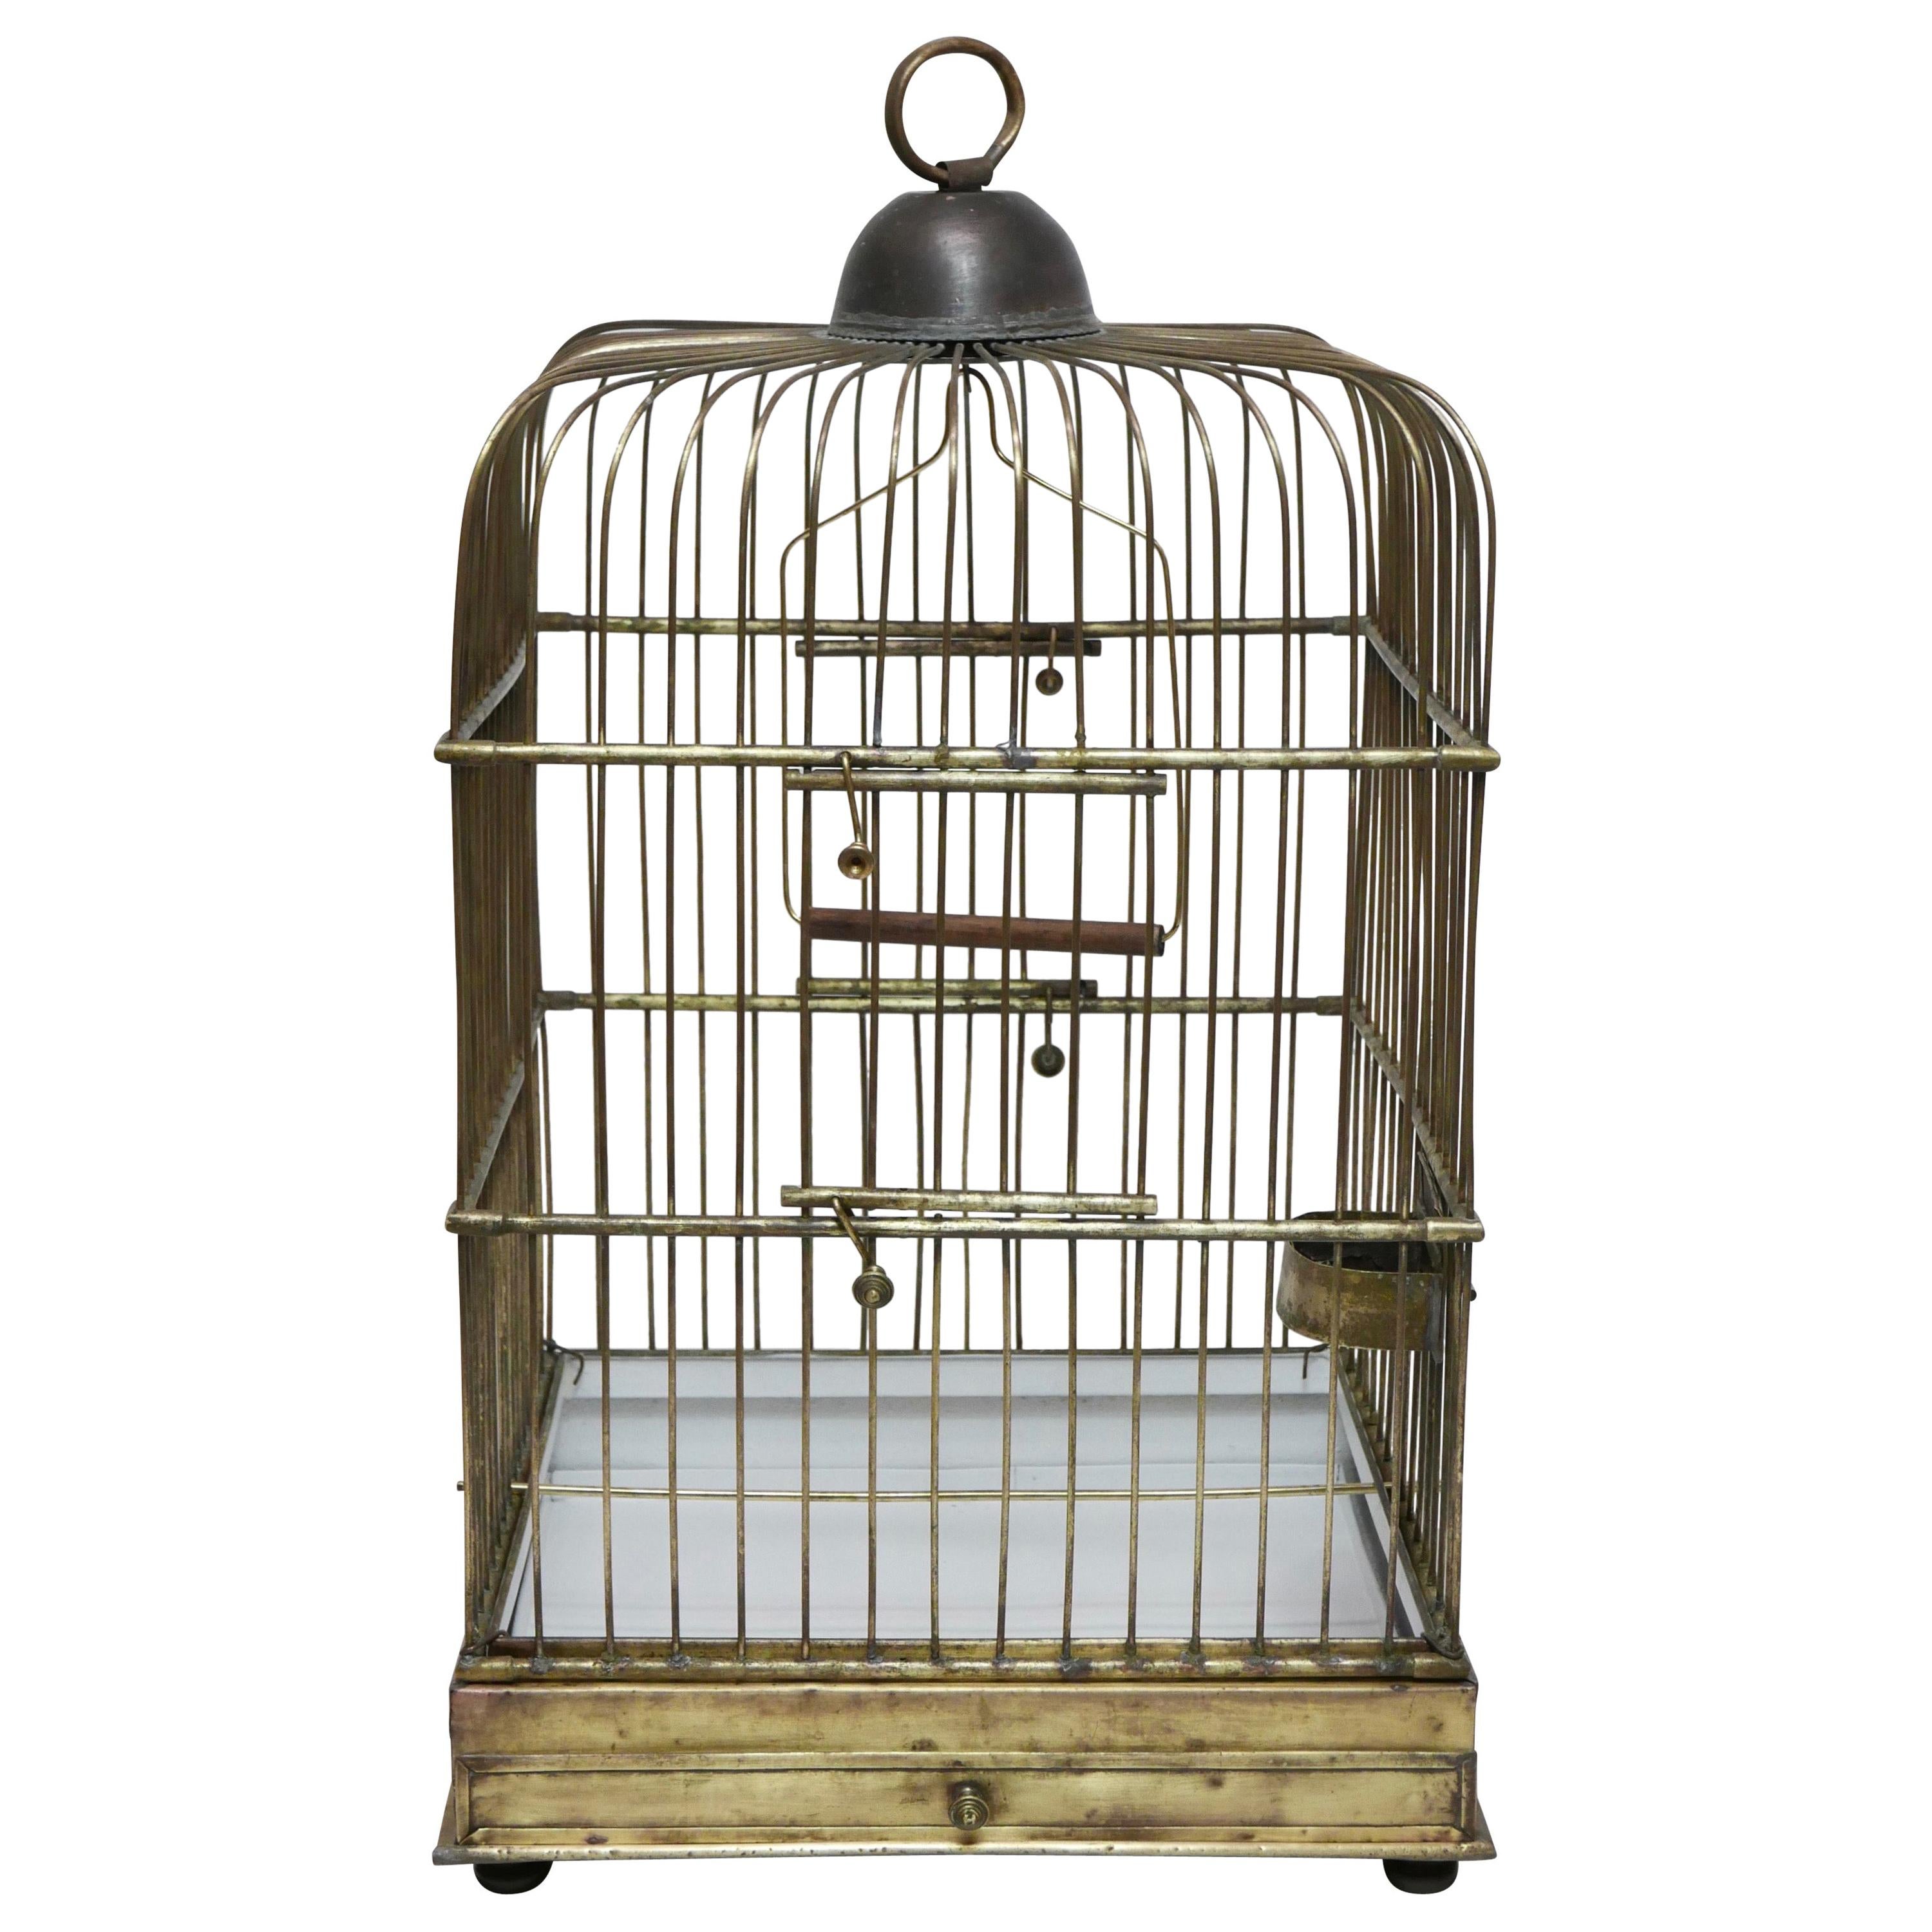 Square Solid Brass Parrot Birdcage, Late 19th Century